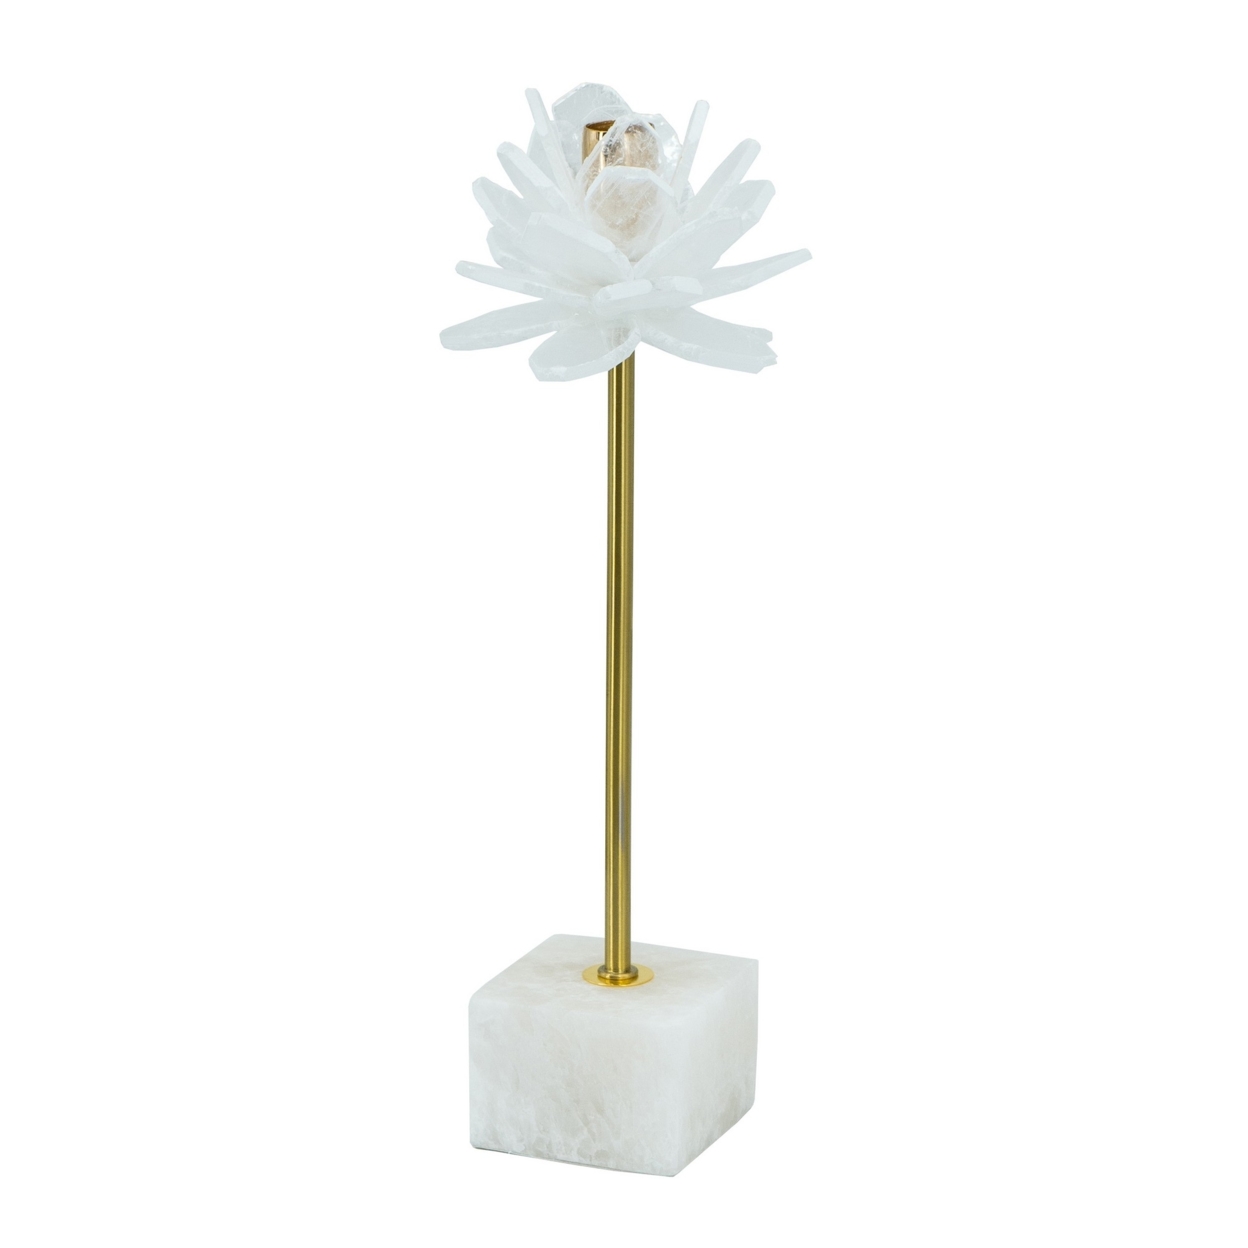 Sel 14 Inch Candle Holder With Modern Selenite Stone Accent, Gold And White- Saltoro Sherpi